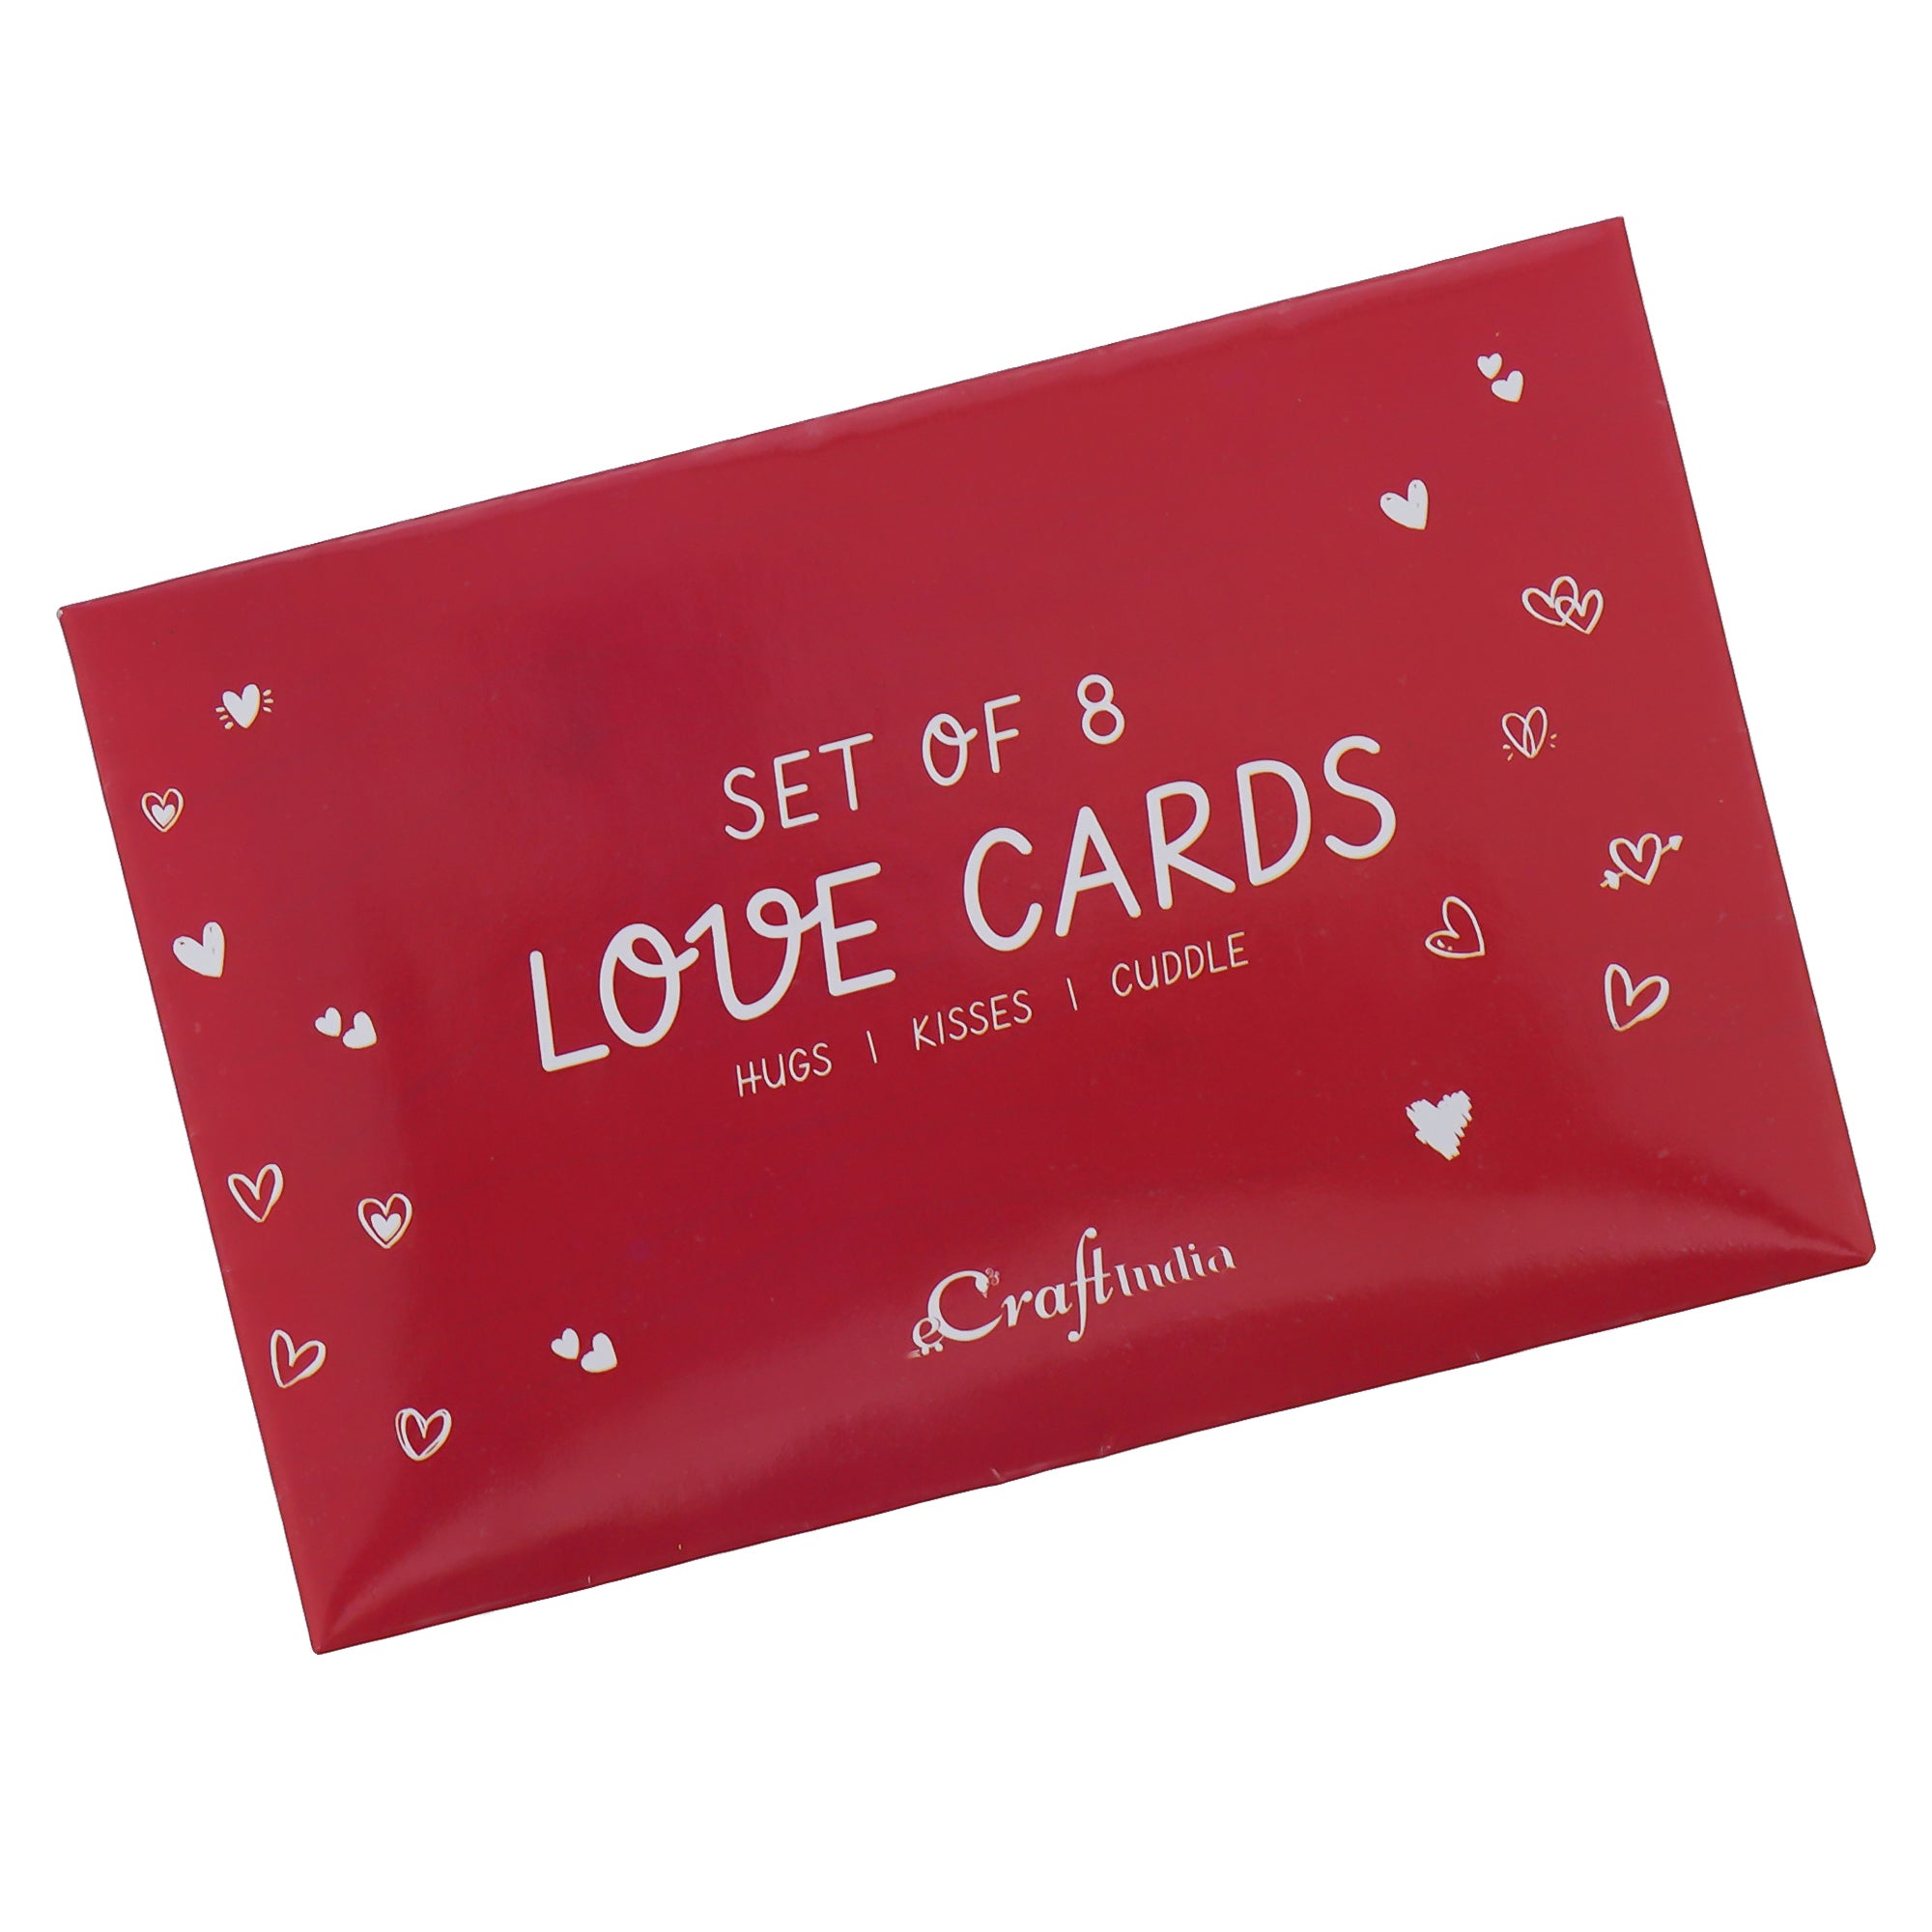 Valentine Combo of Pack of 8 Love Gift Cards, Golden Red Rose Gift Set, "20 Reasons Why I Love You" Printed on Little Red Hearts Decorative Wooden Gift Set Box 7